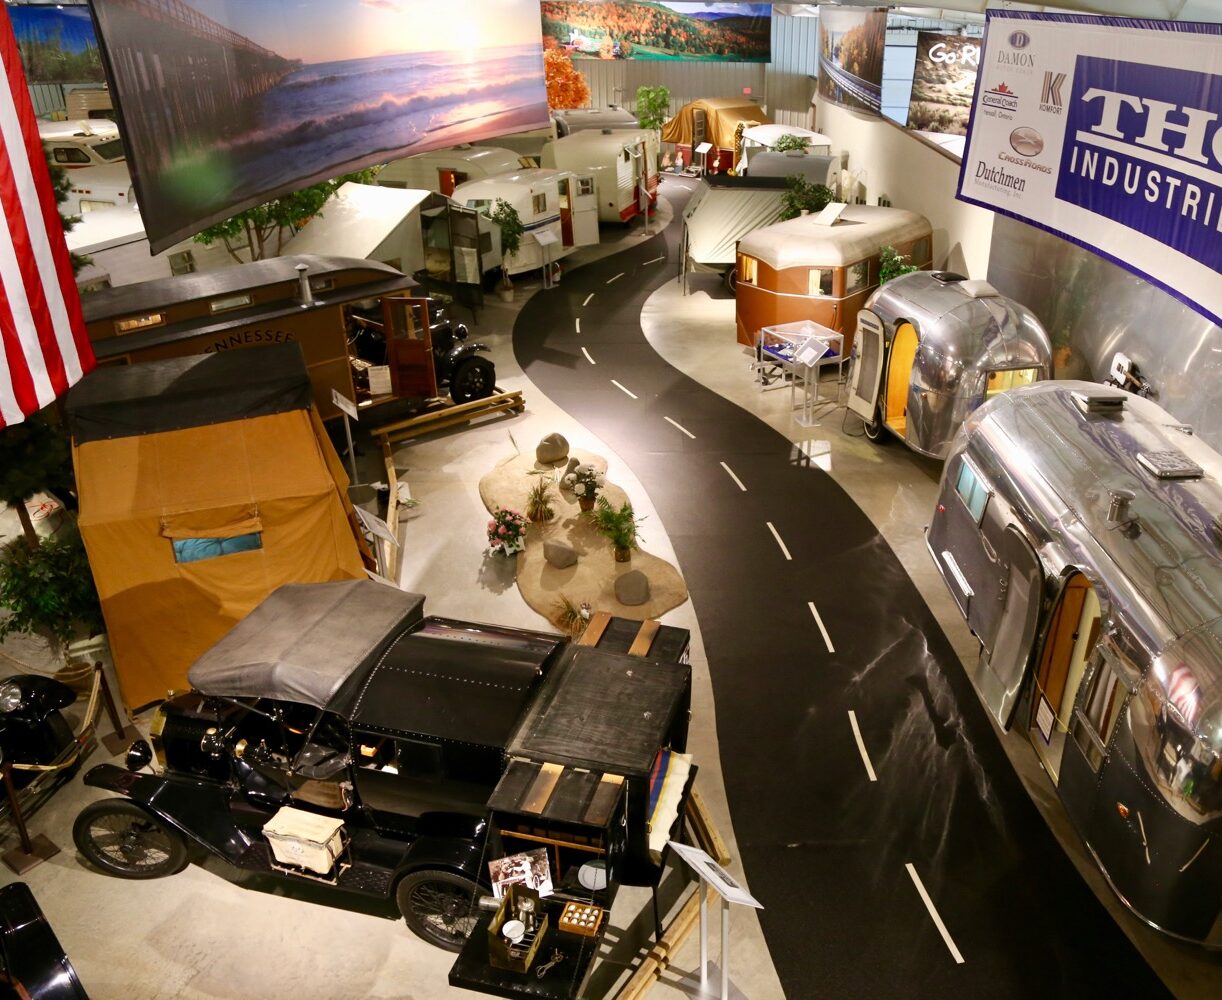 RV/MH Hall of Fame And Museum, Elkhart, Indiana